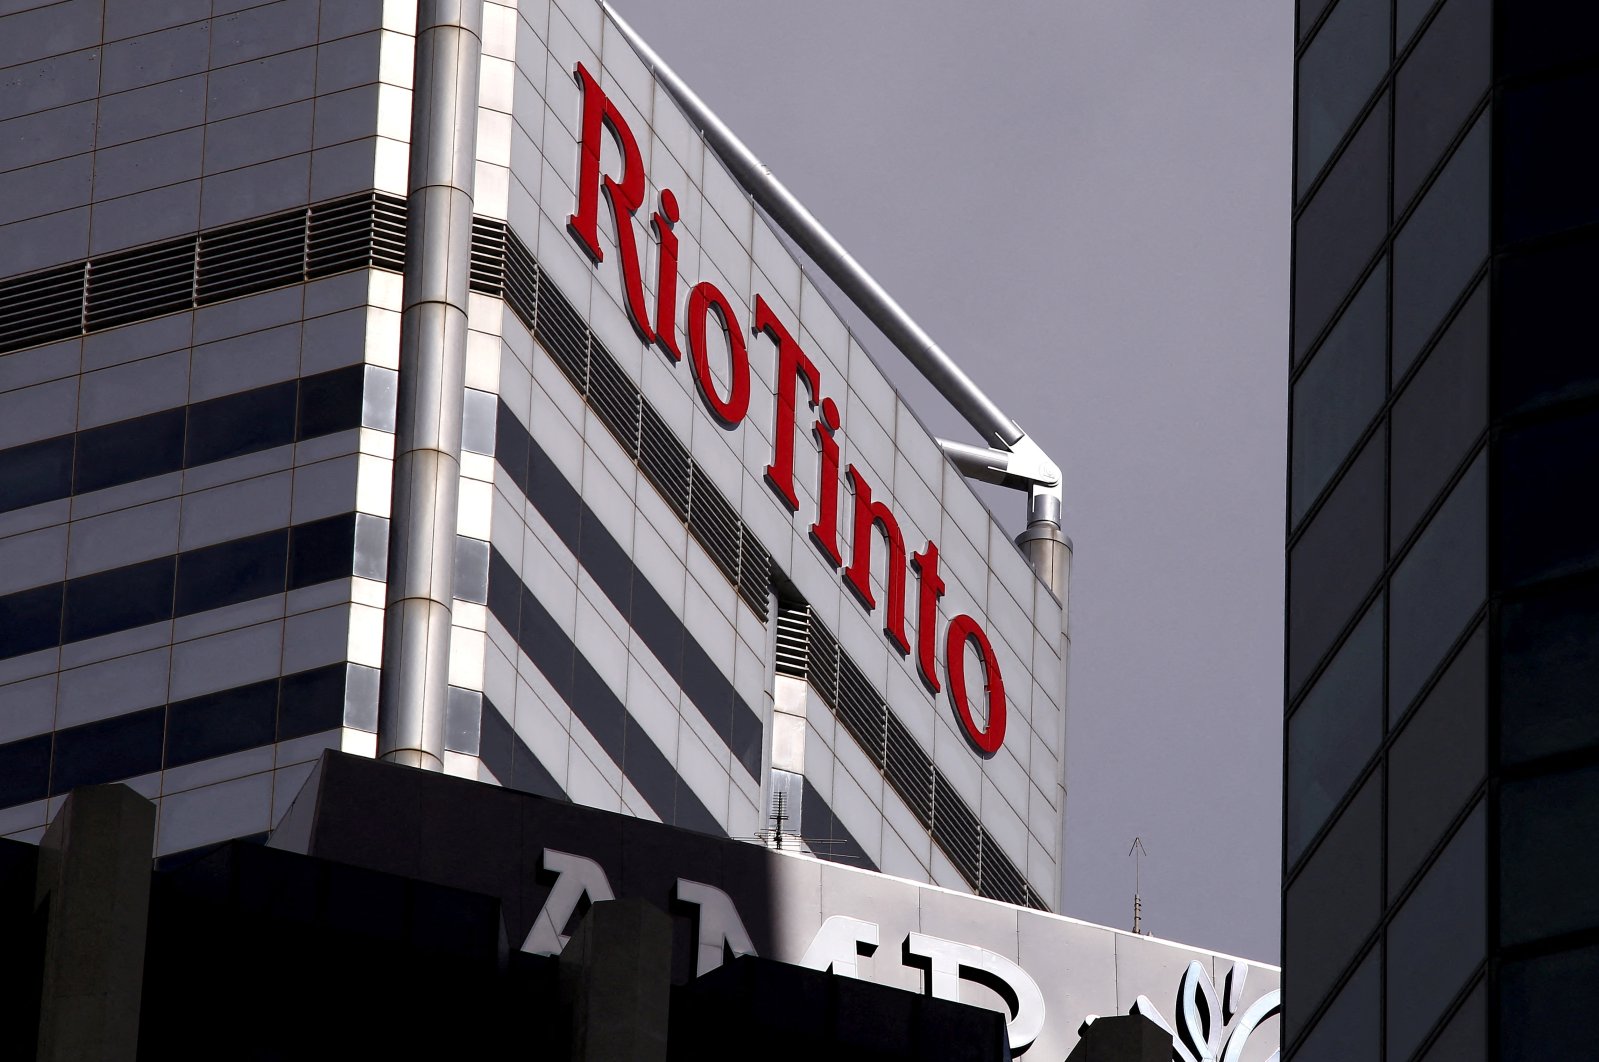 A sign adorns the building where mining company Rio Tinto has their office in Perth, Western Australia, Nov. 19, 2015. (Reuters Photo)